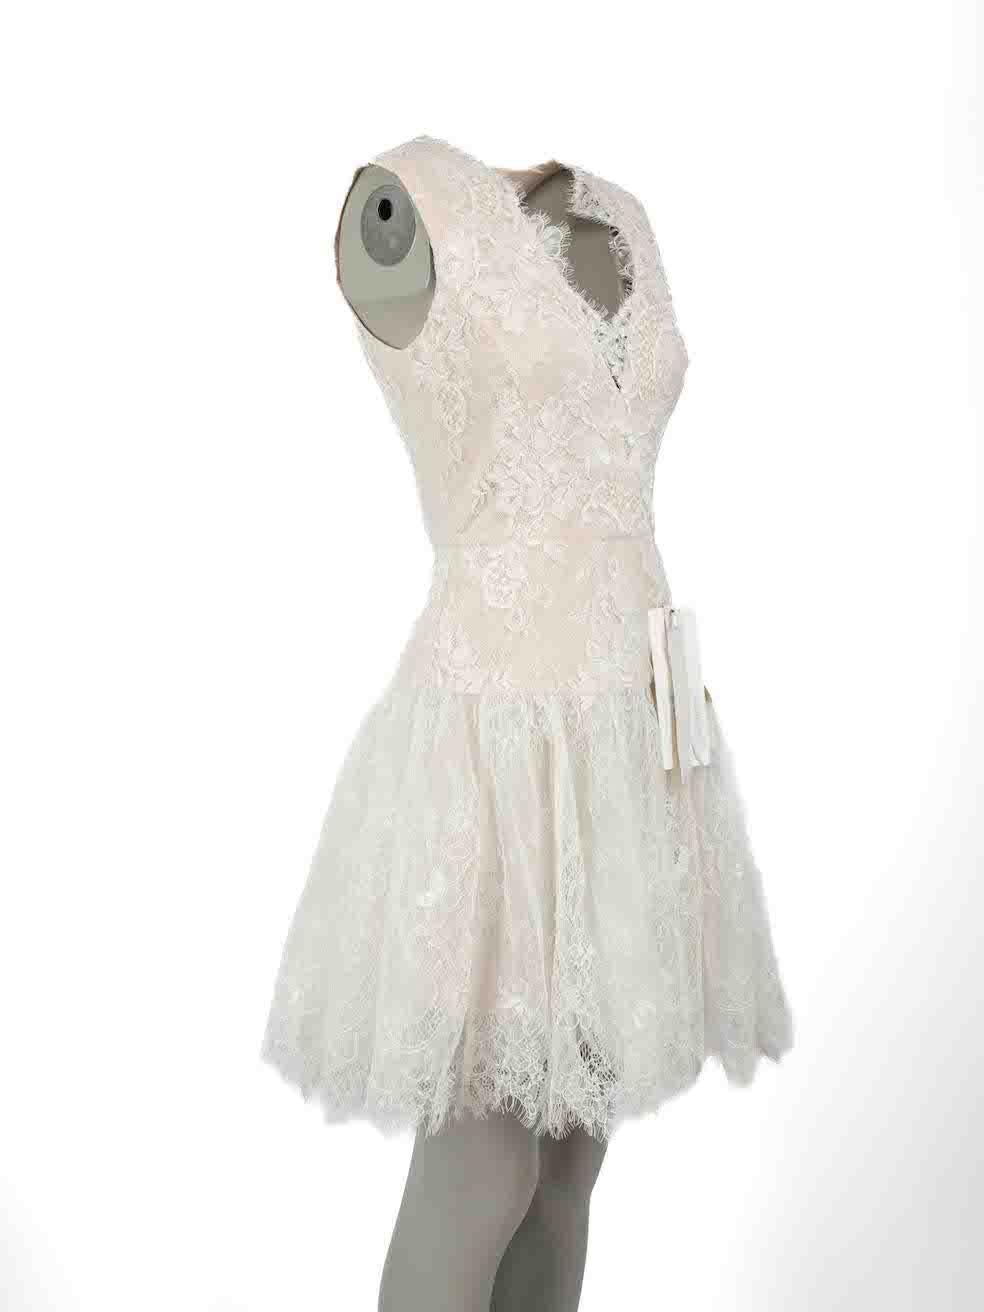 CONDITION is Never worn, with tags. No visible wear to dress is evident on this new Bronx & Banco designer resale item.
 
Details
White
Polyester
Dress
Floral lace pattern
Mini
Sleeveless
V-neck
Back zip fastening
 
Made in China
 
Composition
100%